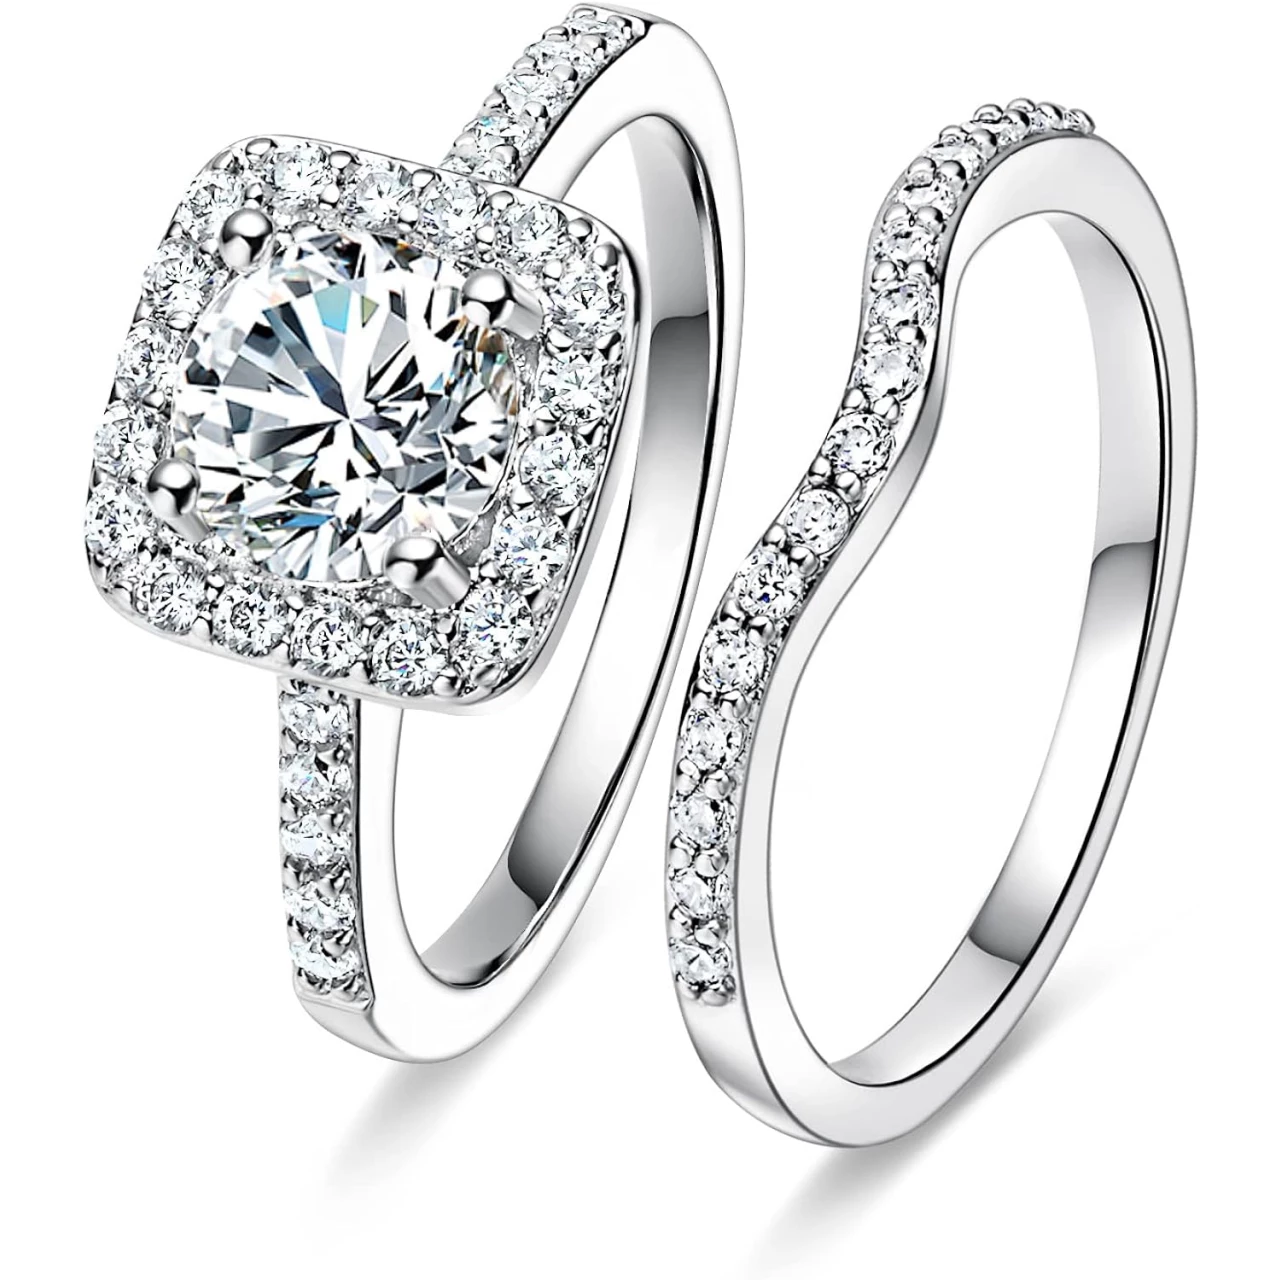 MDFUN 18K White Gold Plated CZ Halo Ring